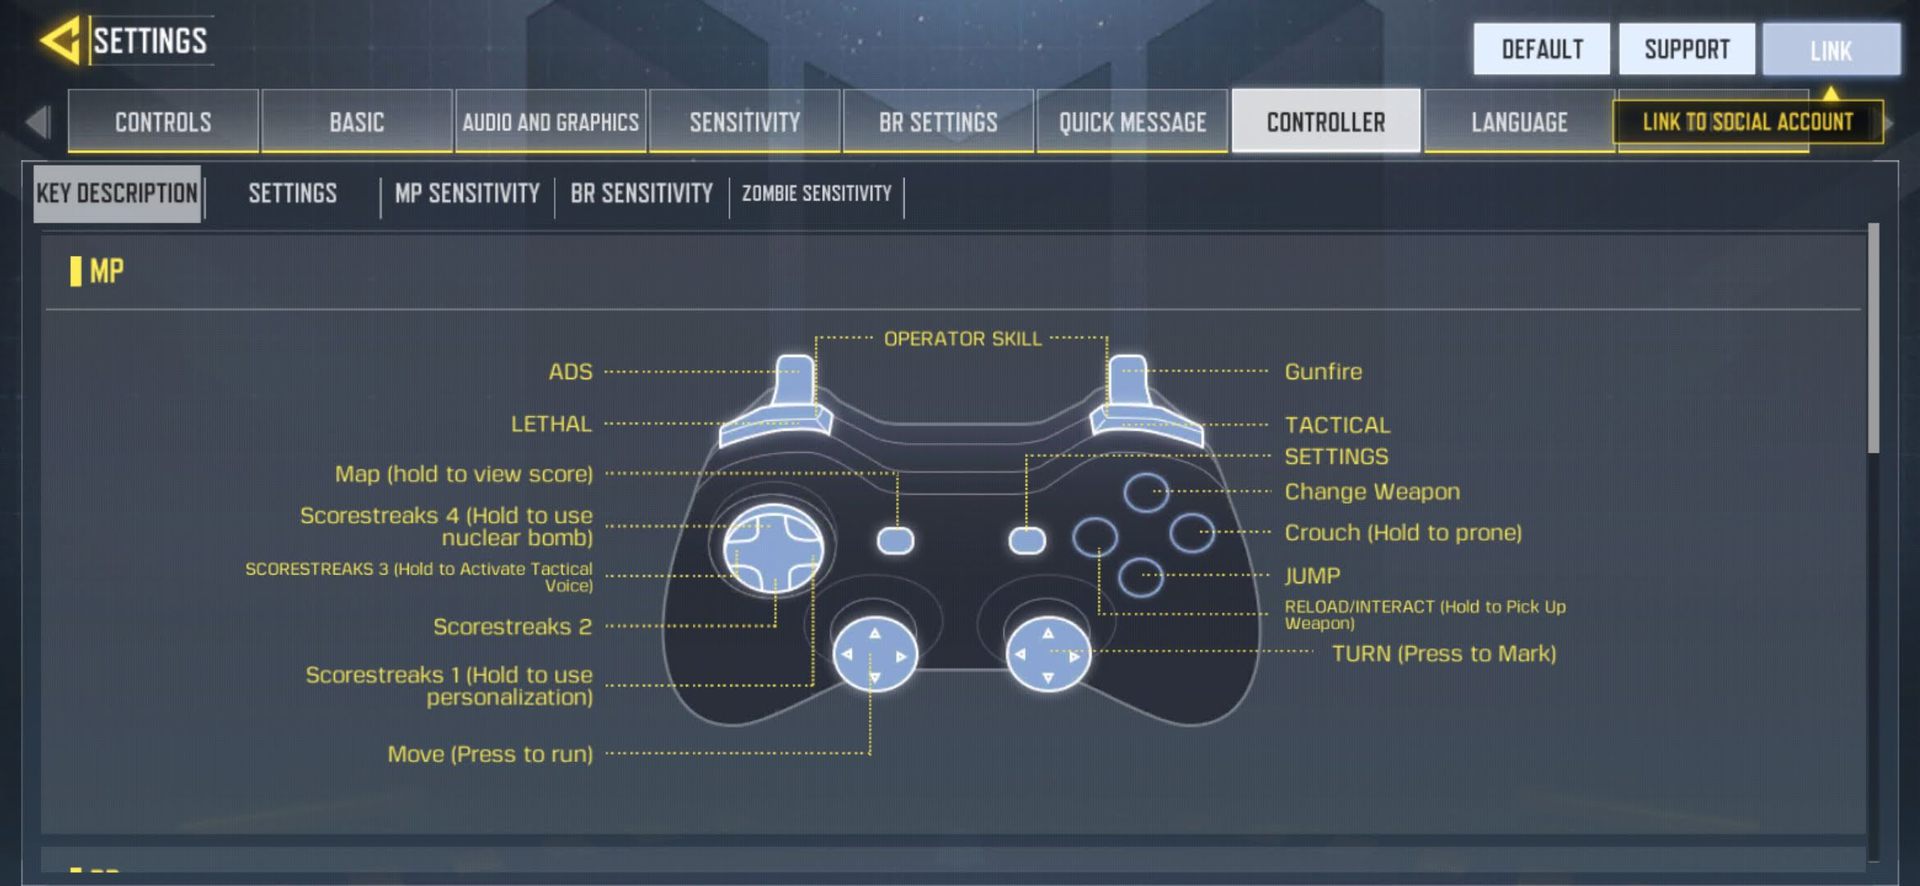 Call of Duty Mobile' Controller Guide - How to Use PS4, Xbox